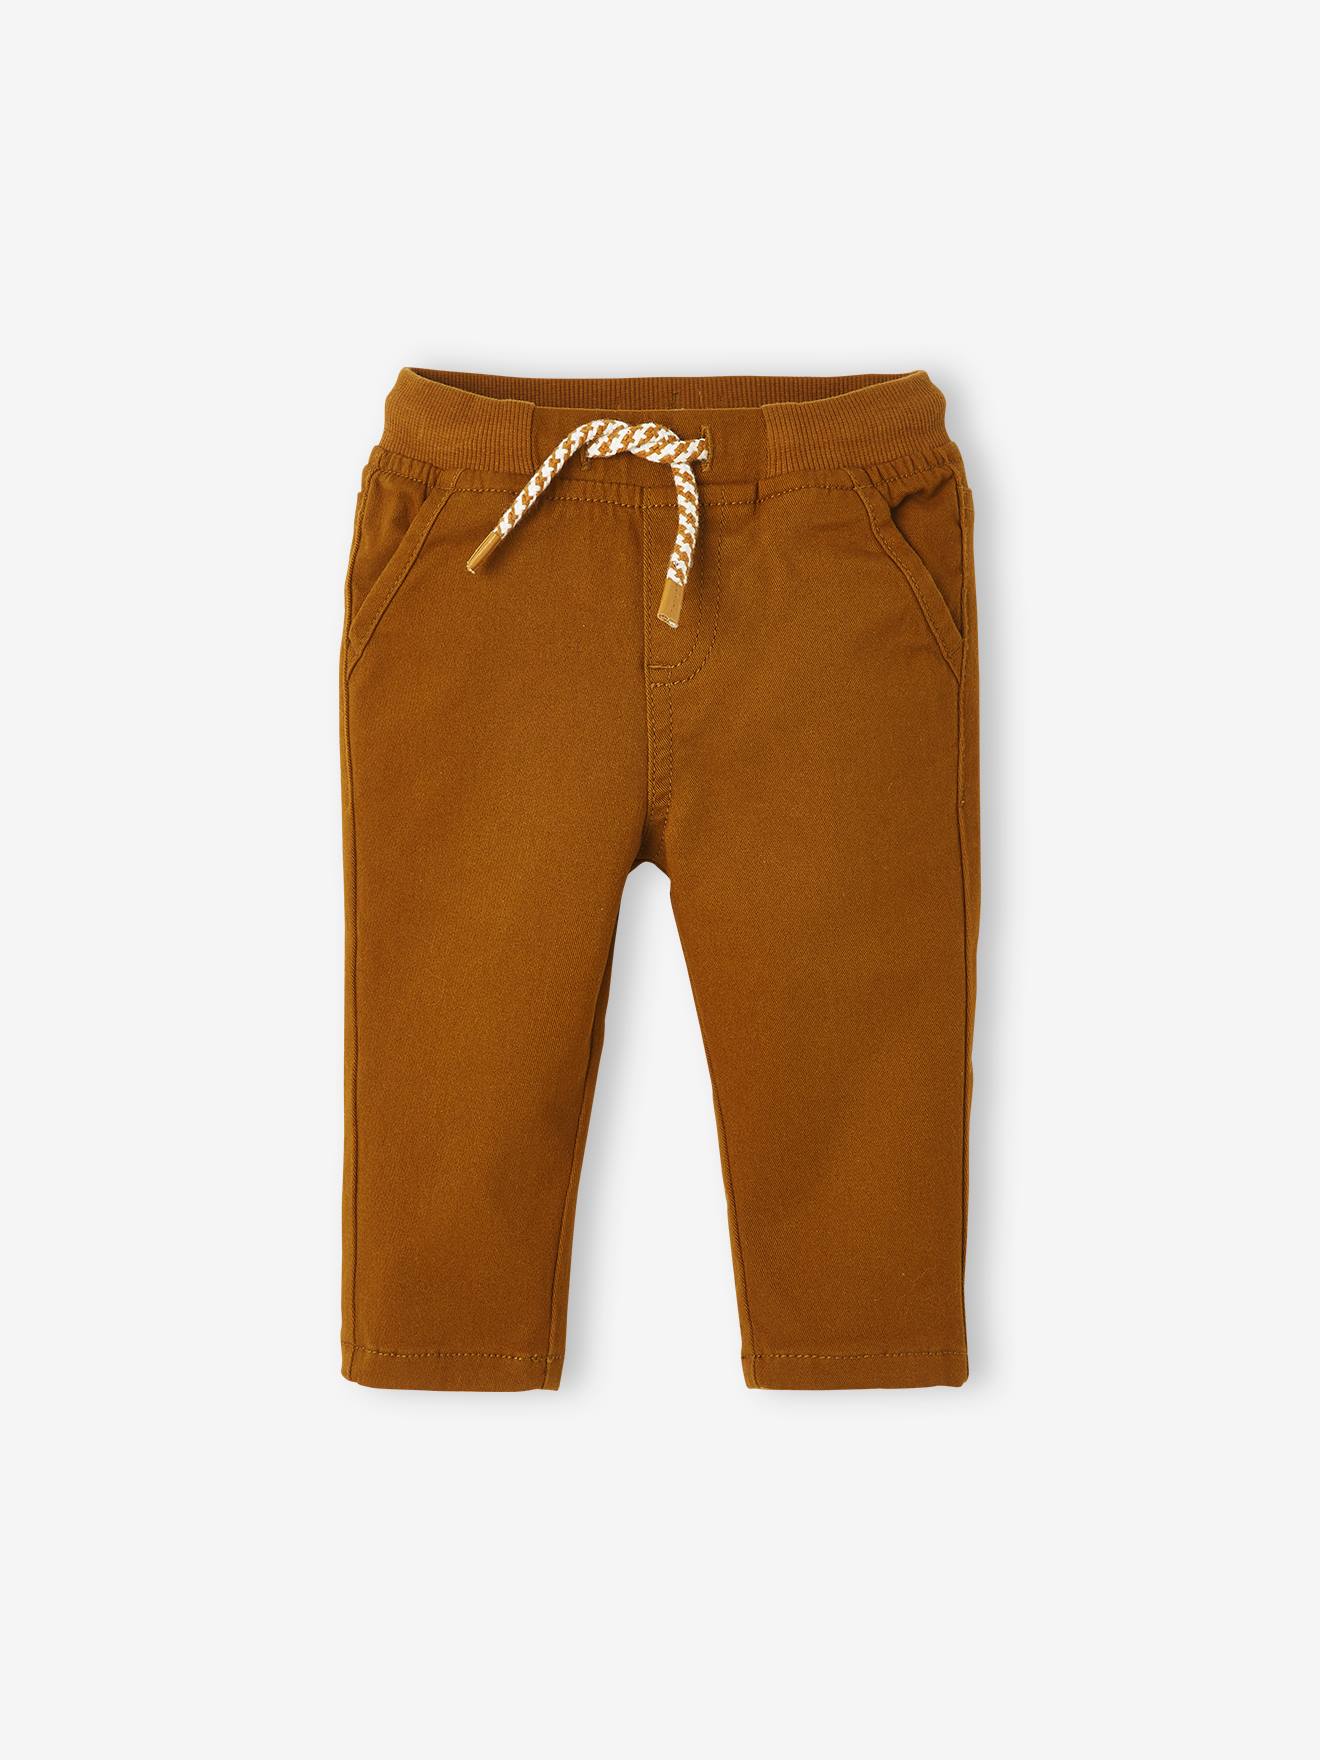 Lined Twill Trousers for Baby Boys brown medium solid